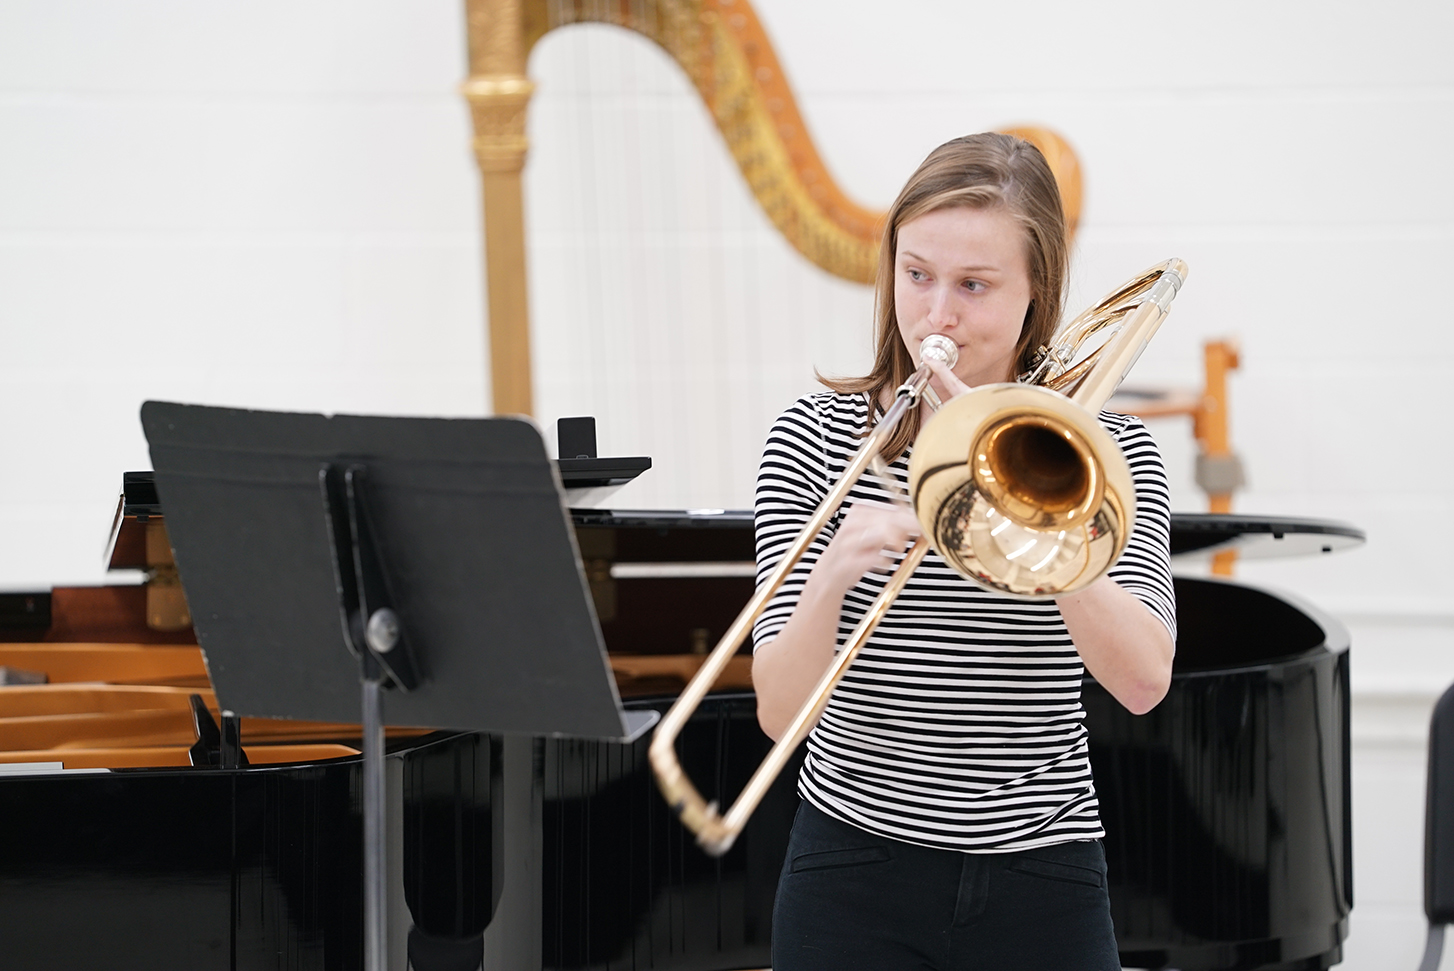 A student plays the trombone during a recital